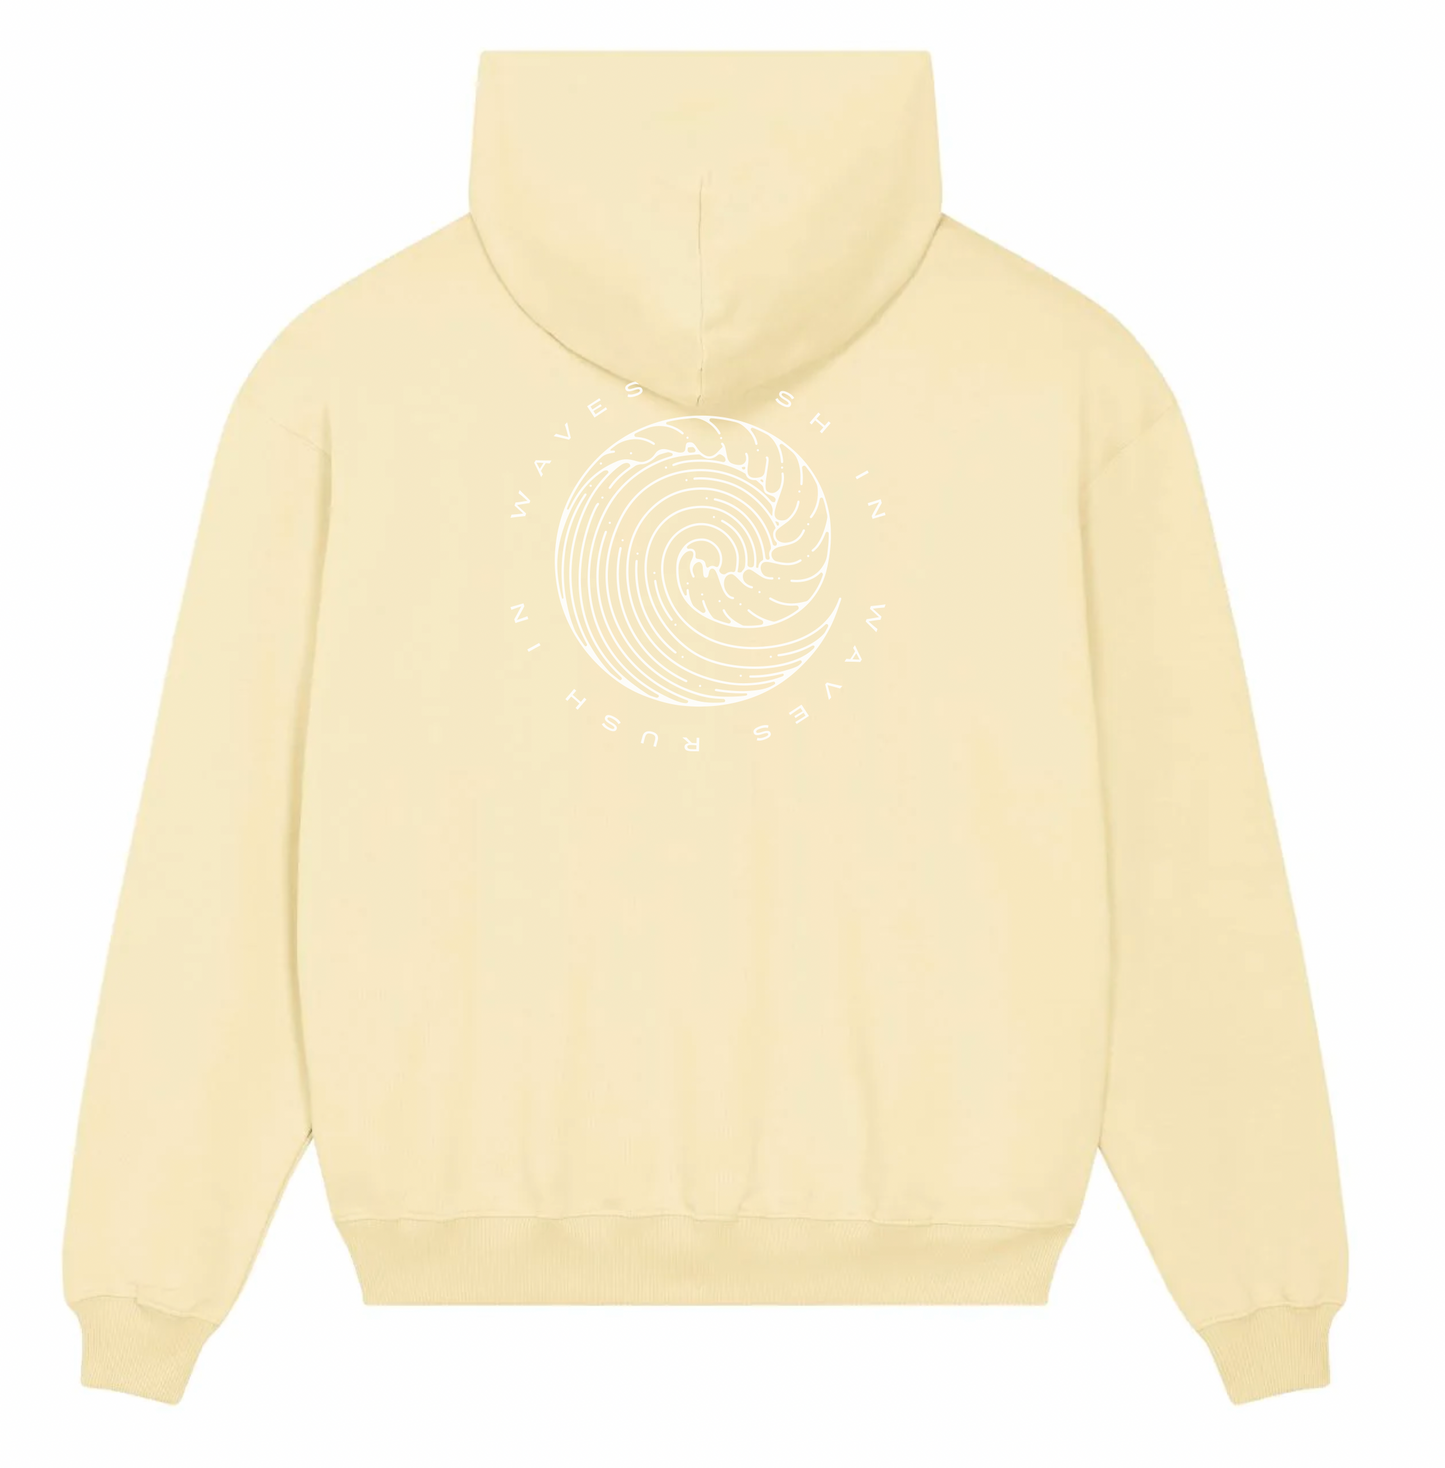 WAVES RUSH IN BUTTER brushed organic cotton unisex hoodie